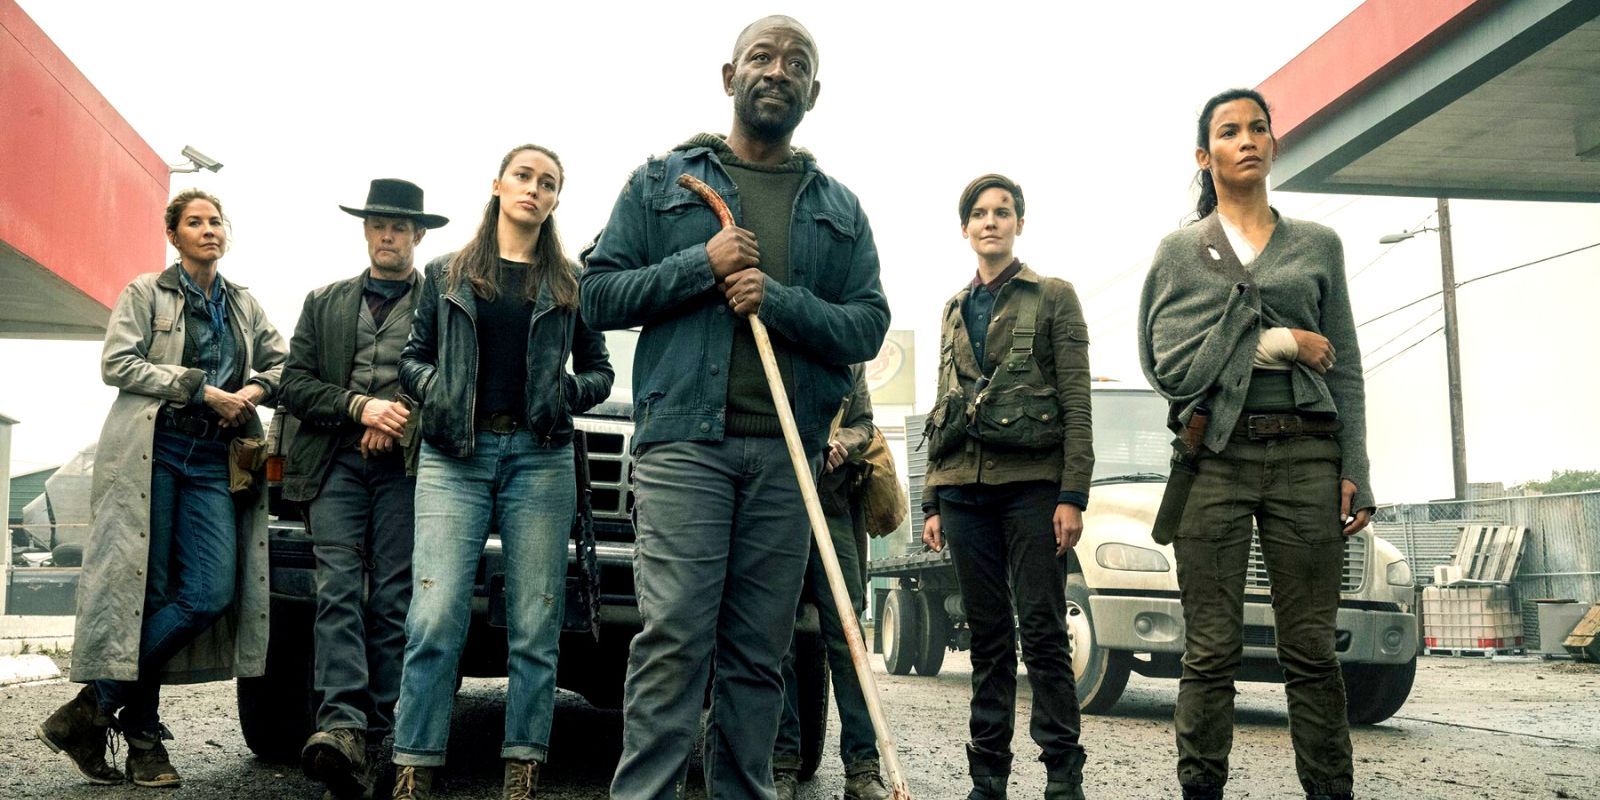 The full cast of Fear the Walking Dead posing in a derelict gas station.